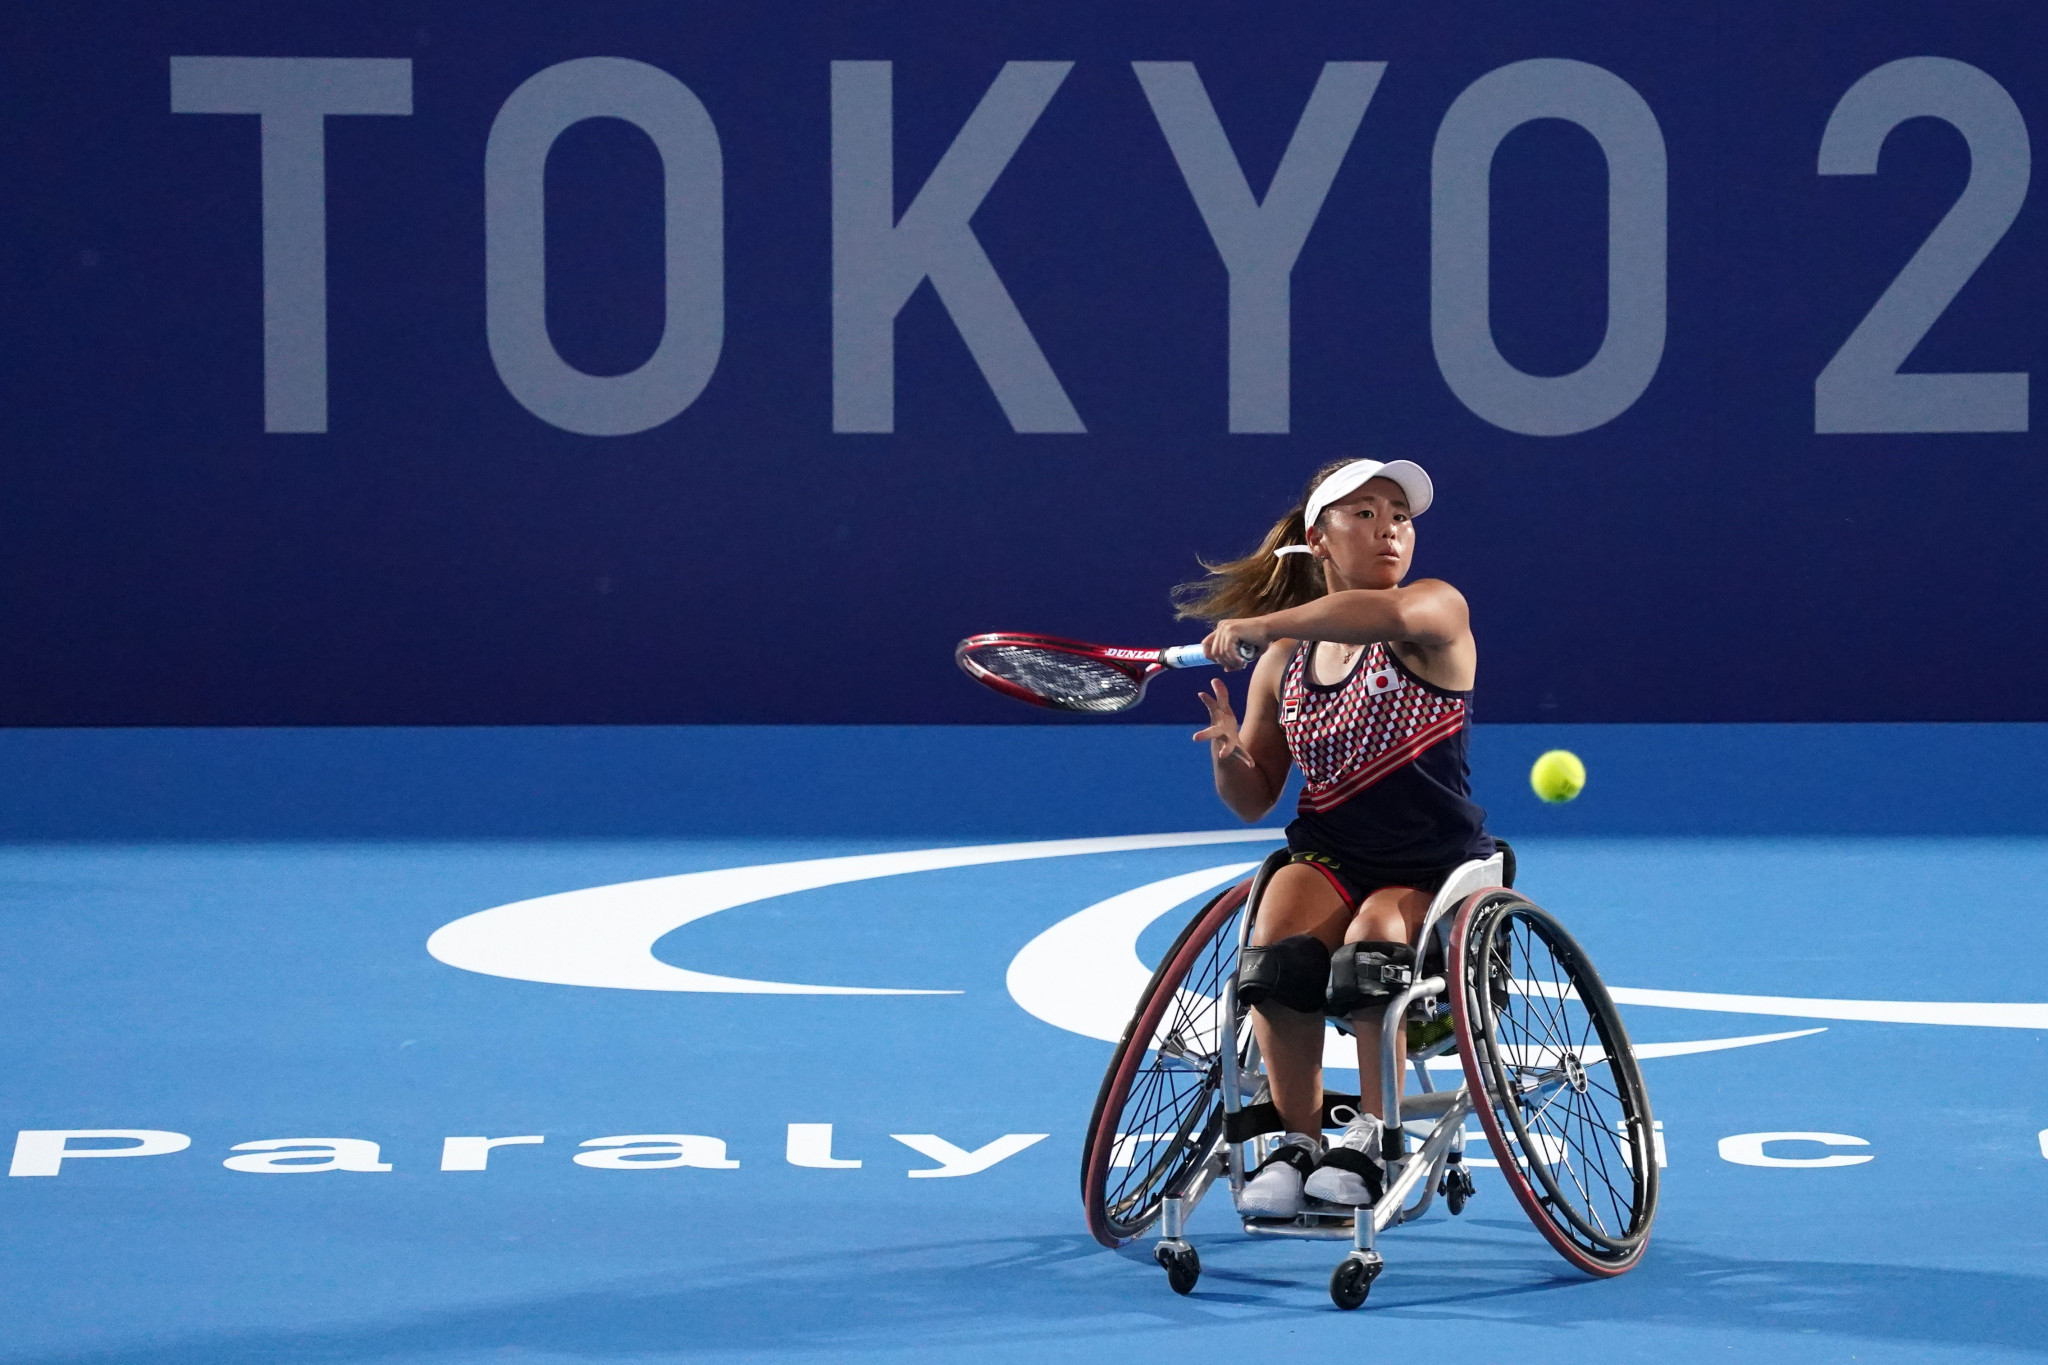 Kamiji and Kunieda carry home hopes in wheelchair tennis at Tokyo 2020 Paralympics